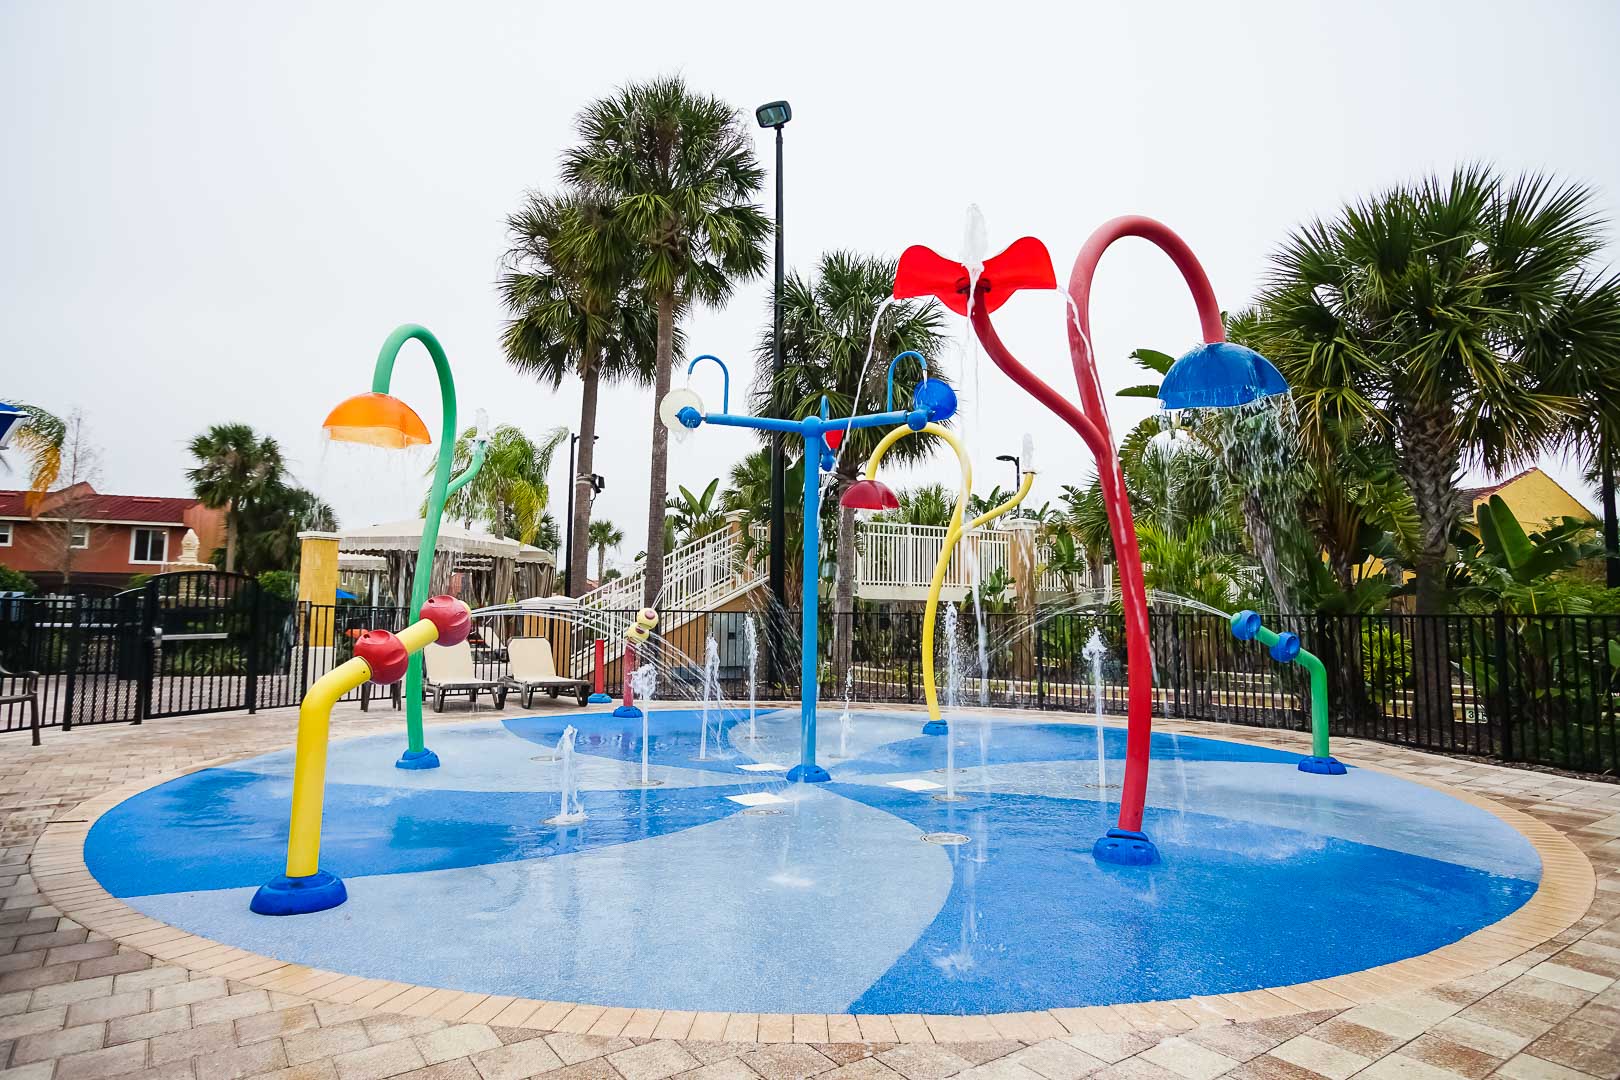 A colorful kids play area at VRI's Fantasy World Resort in Florida.